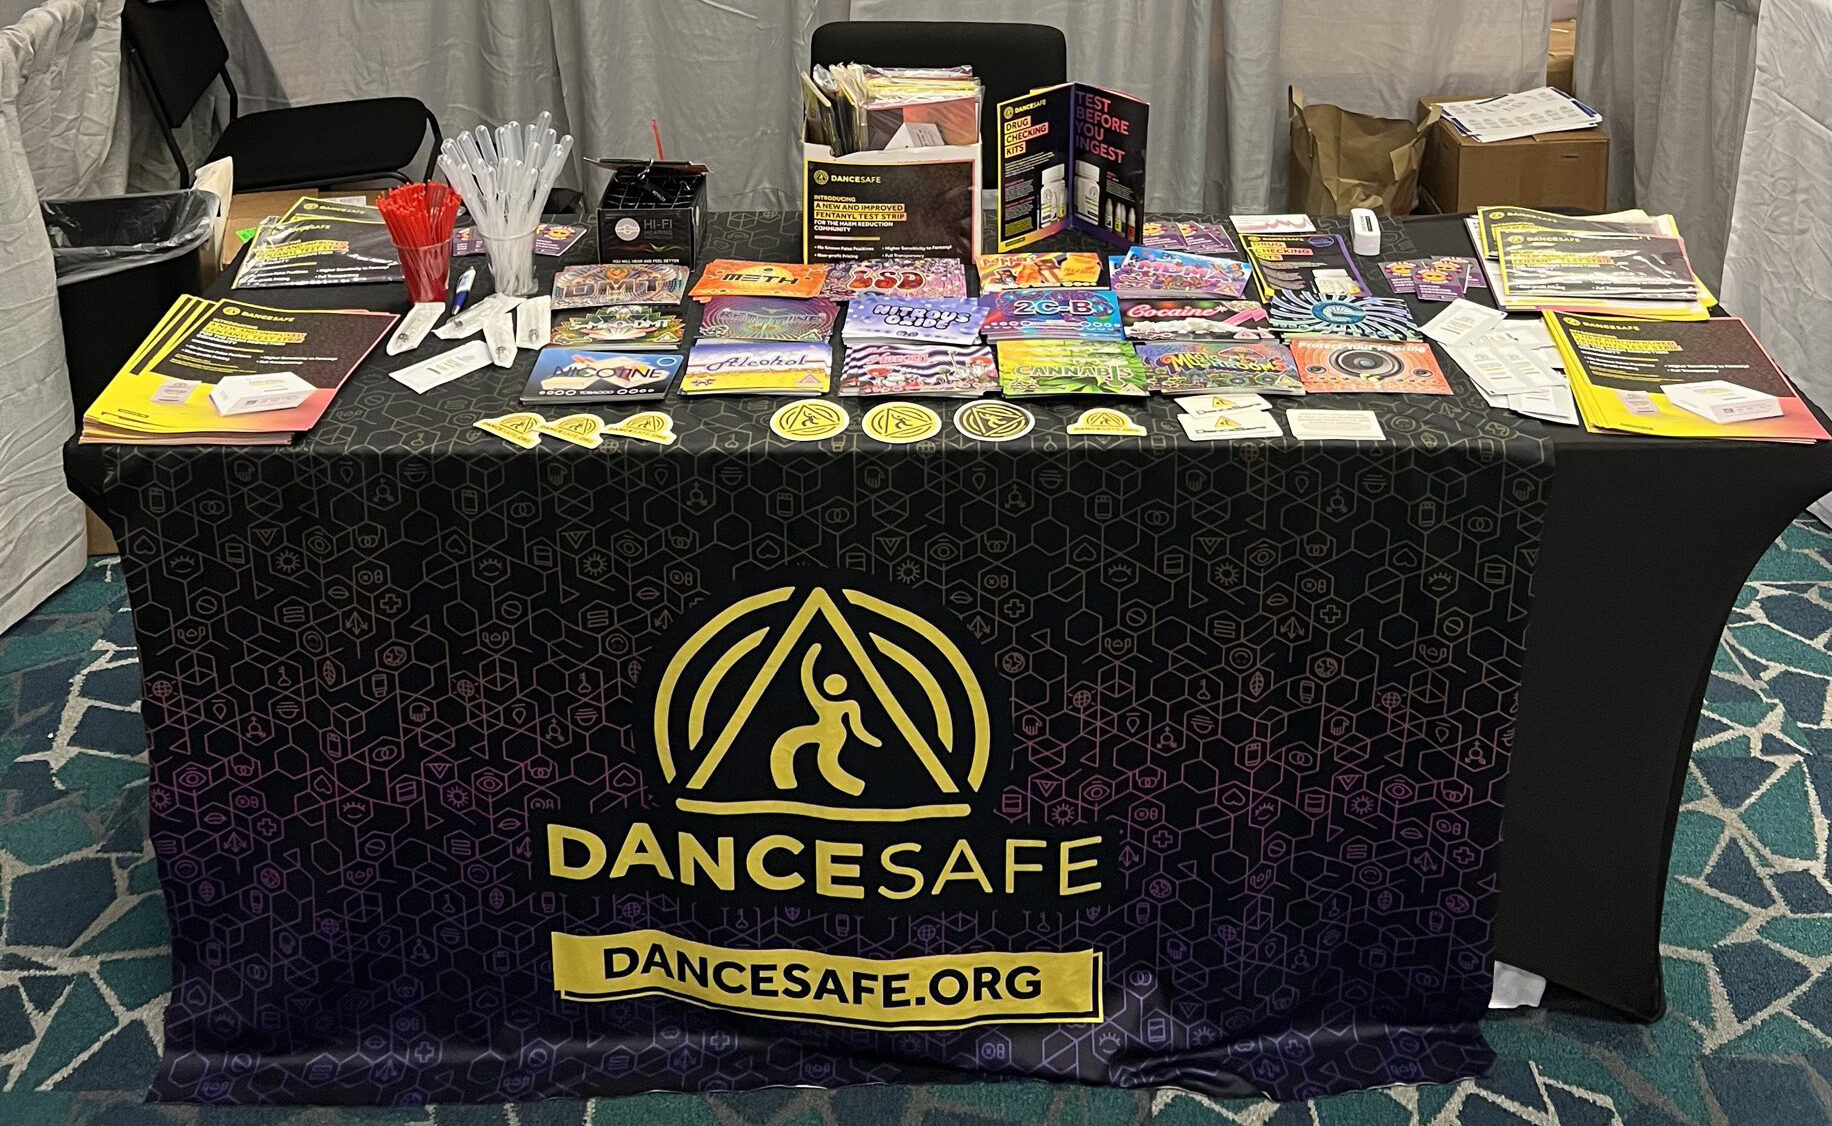 A photo of the DanceSafe booth at a conference, covered in colorful drug info cards, stickers, and fentanyl test strips.